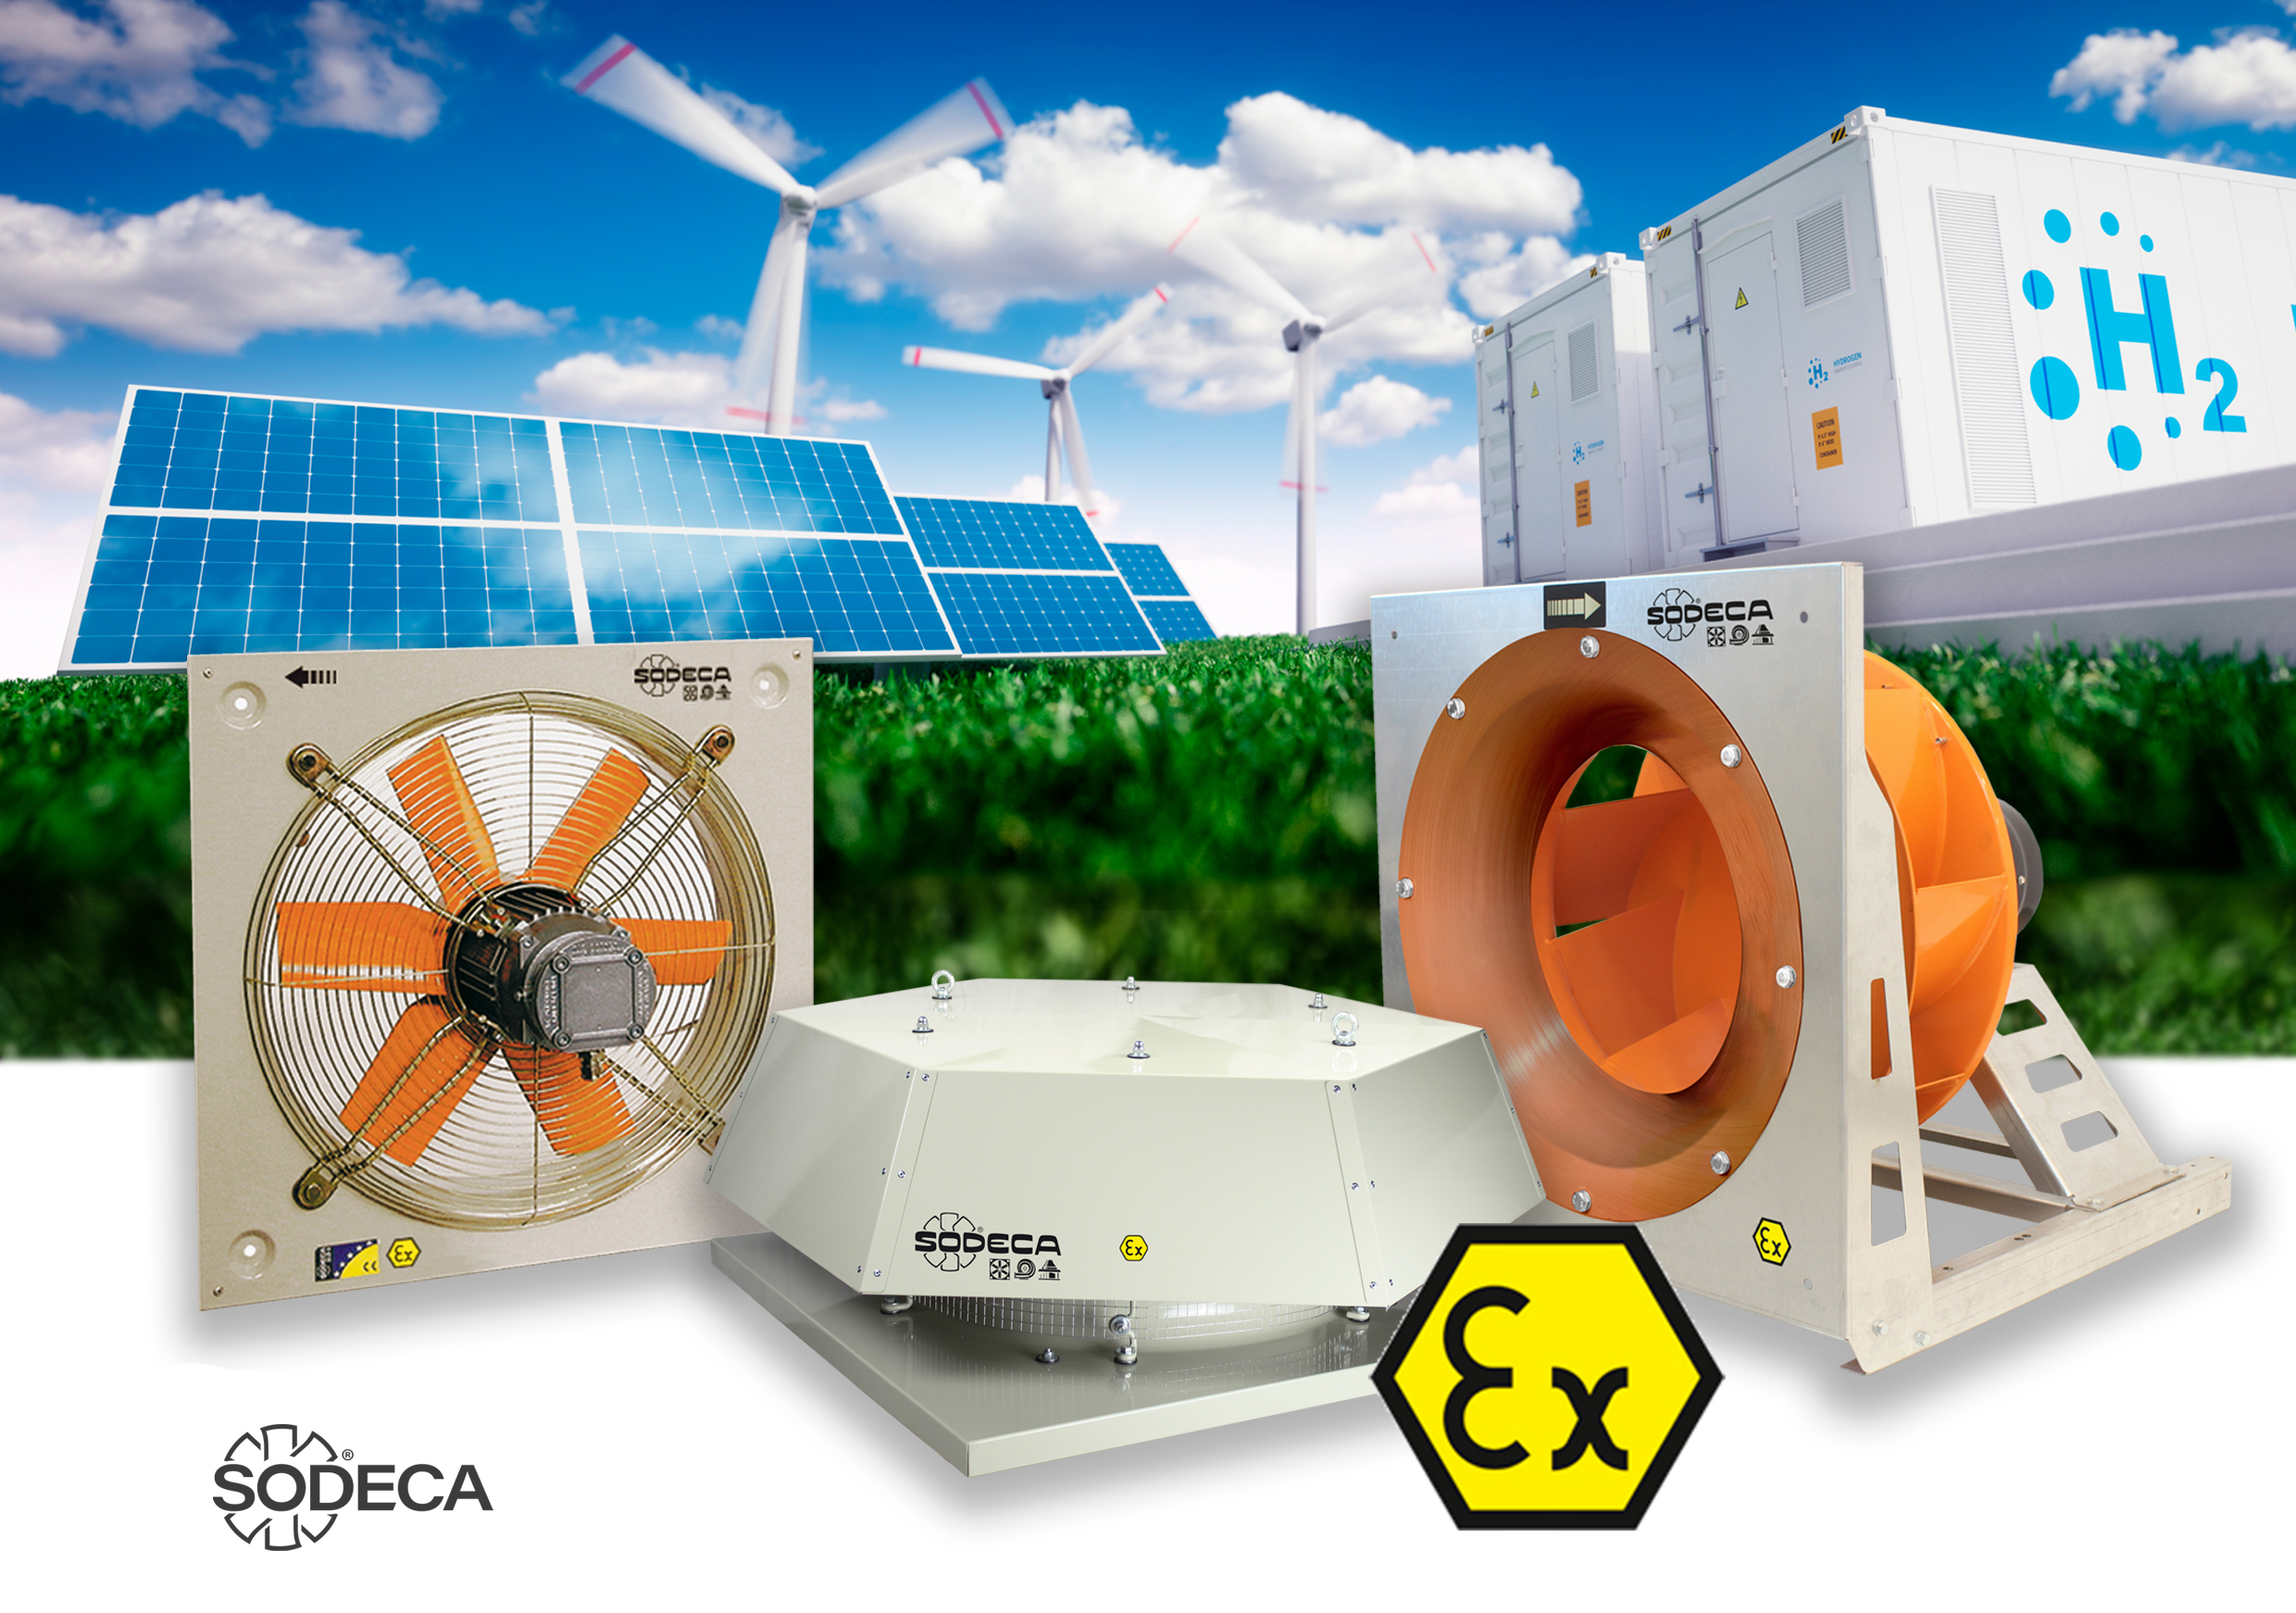 SODECA's ATEX ventilation solutions guarantee the elimination of hydrogen in clean energy generation facilities.